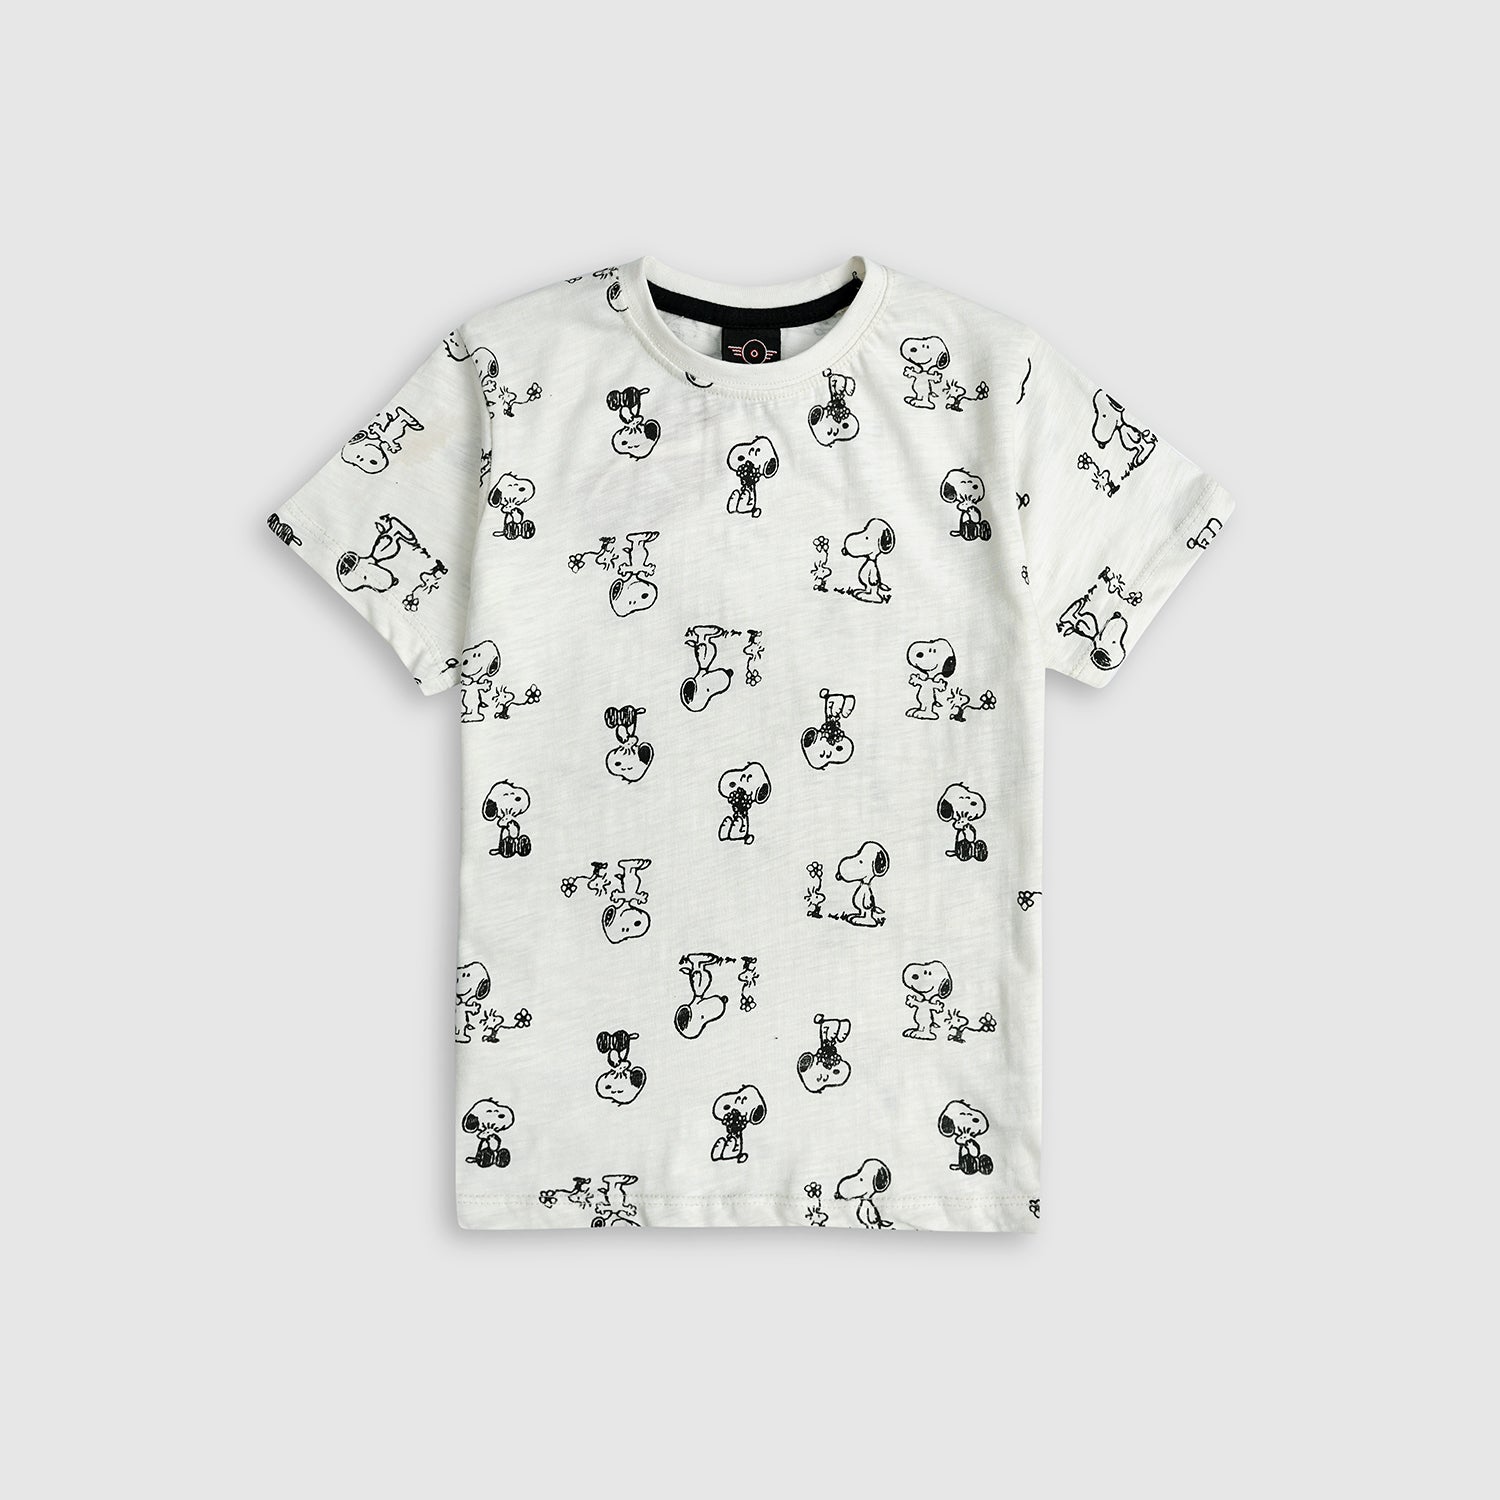 Boys Soft Cotton All Over Printed T-Shirt